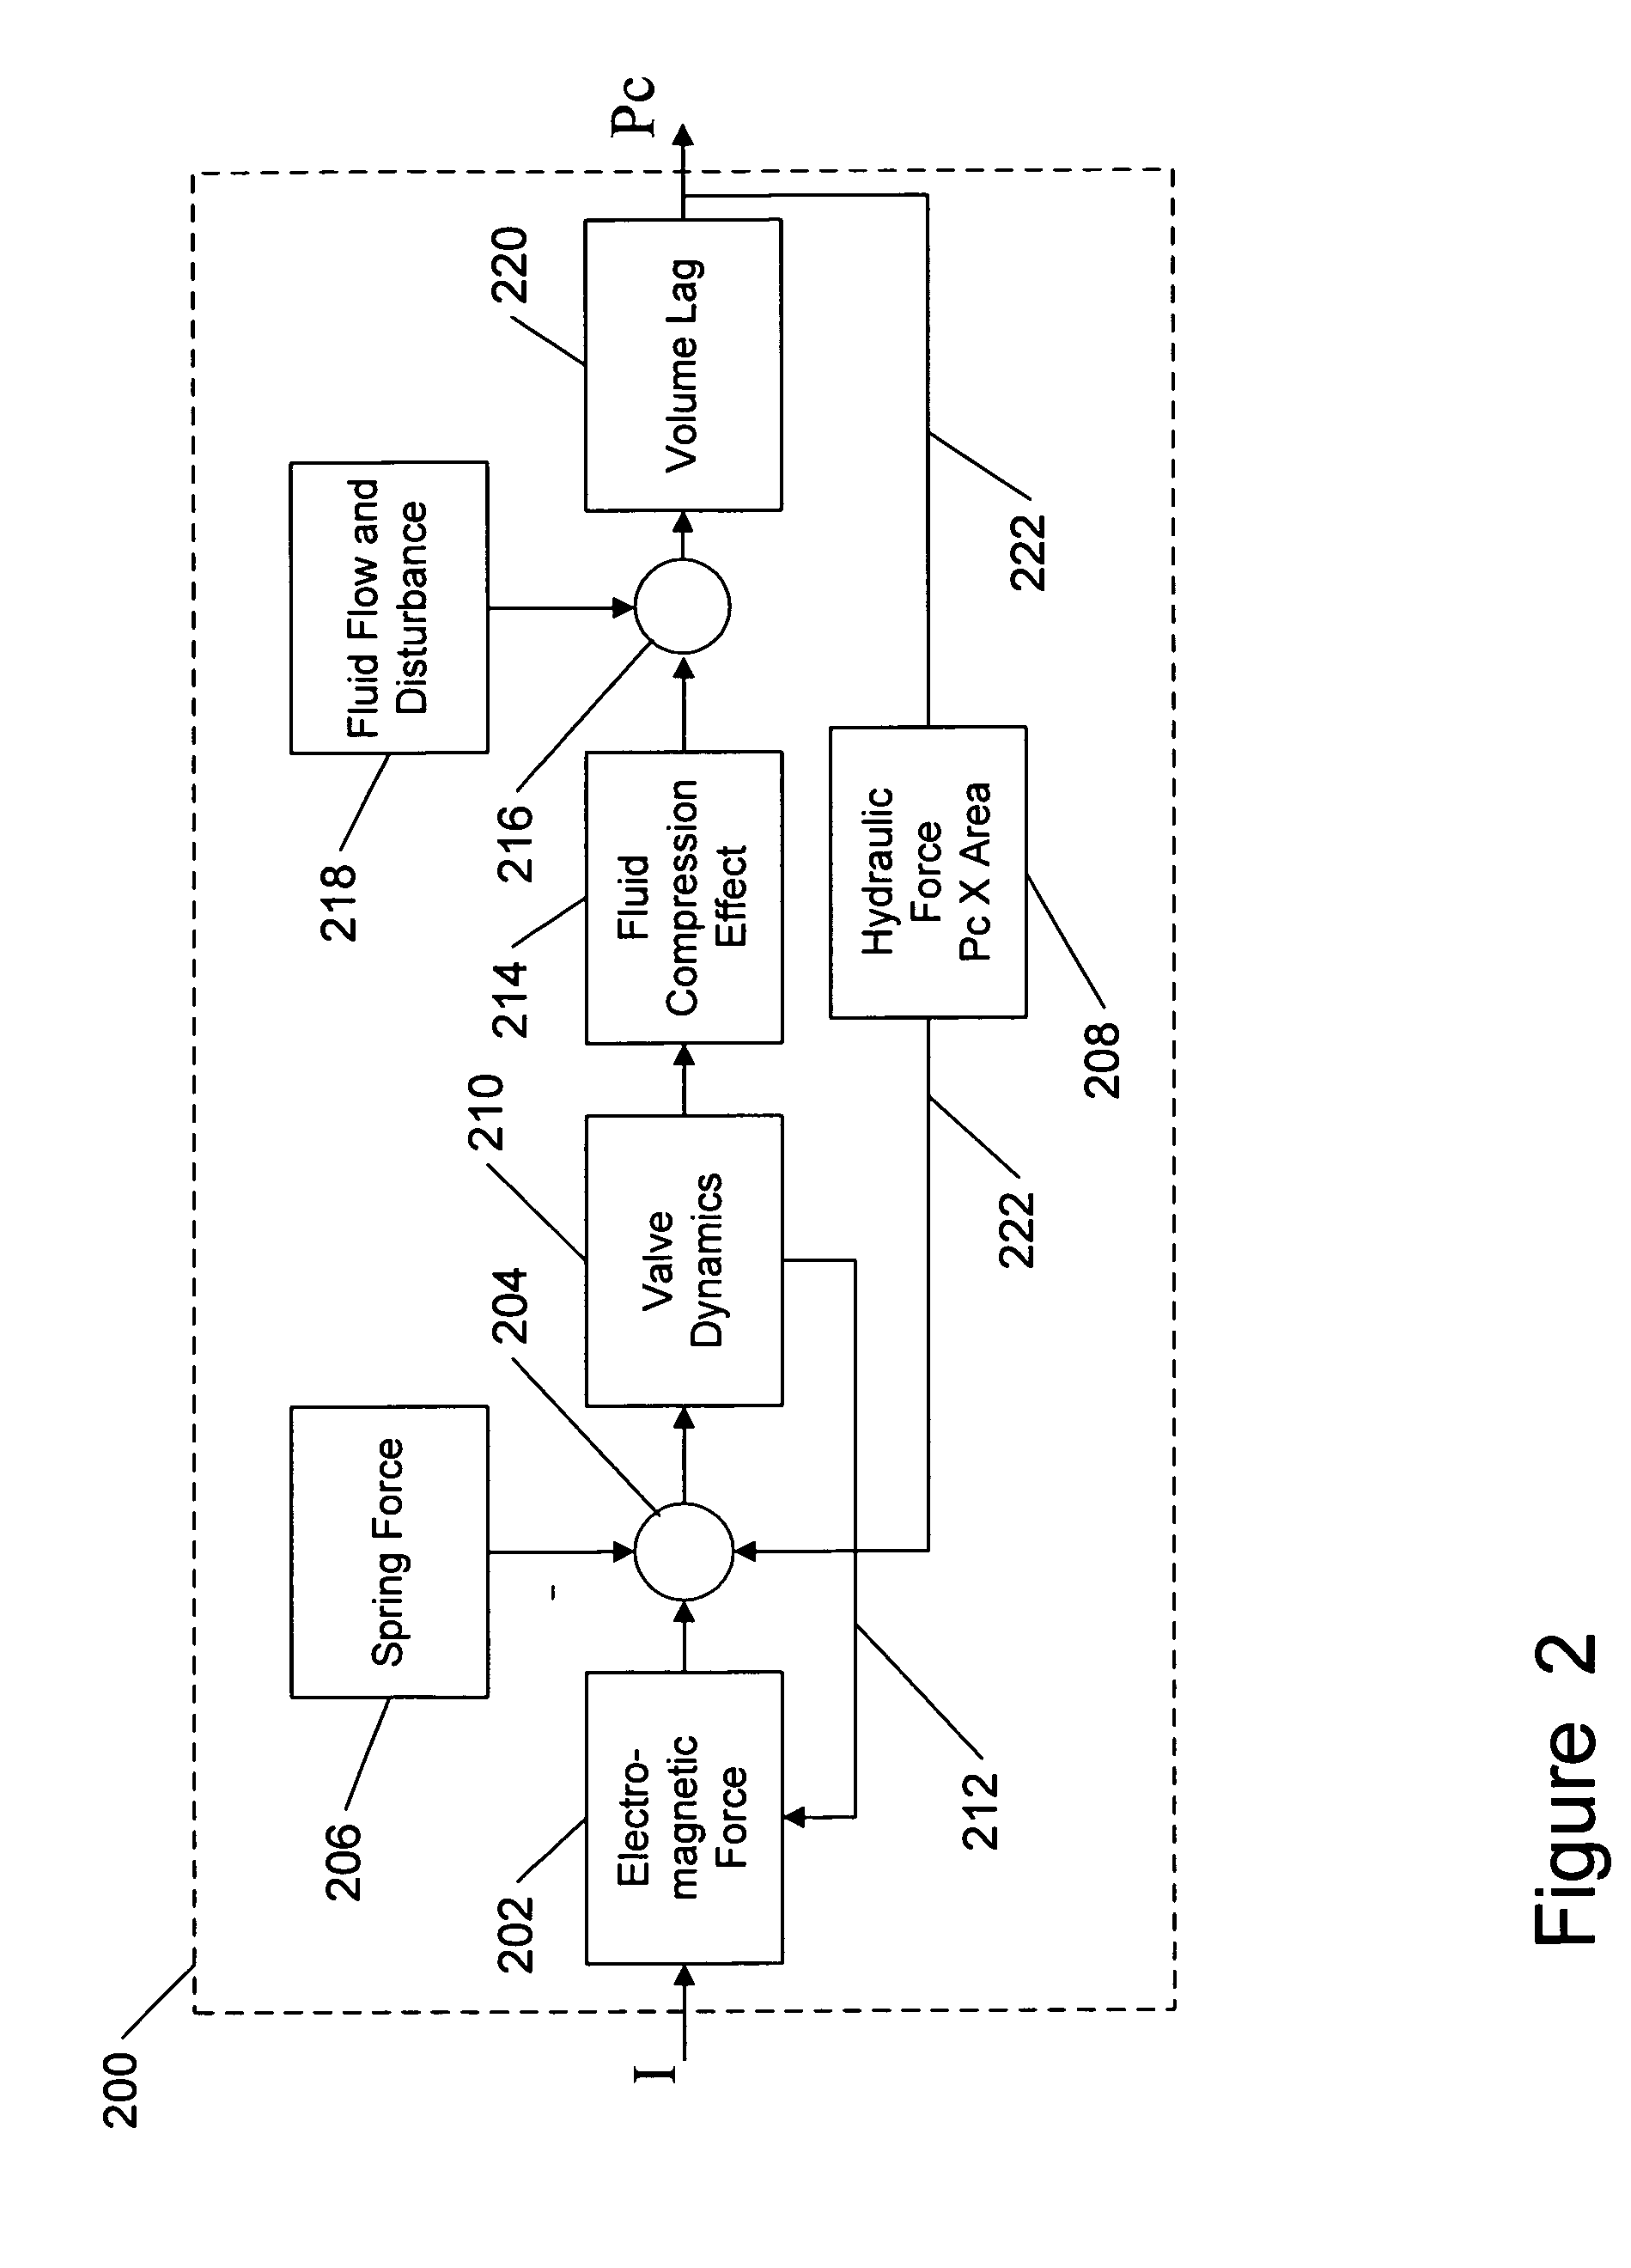 Mode selection and switching logic in a closed-loop pulse width modulation valve-based transmission control system